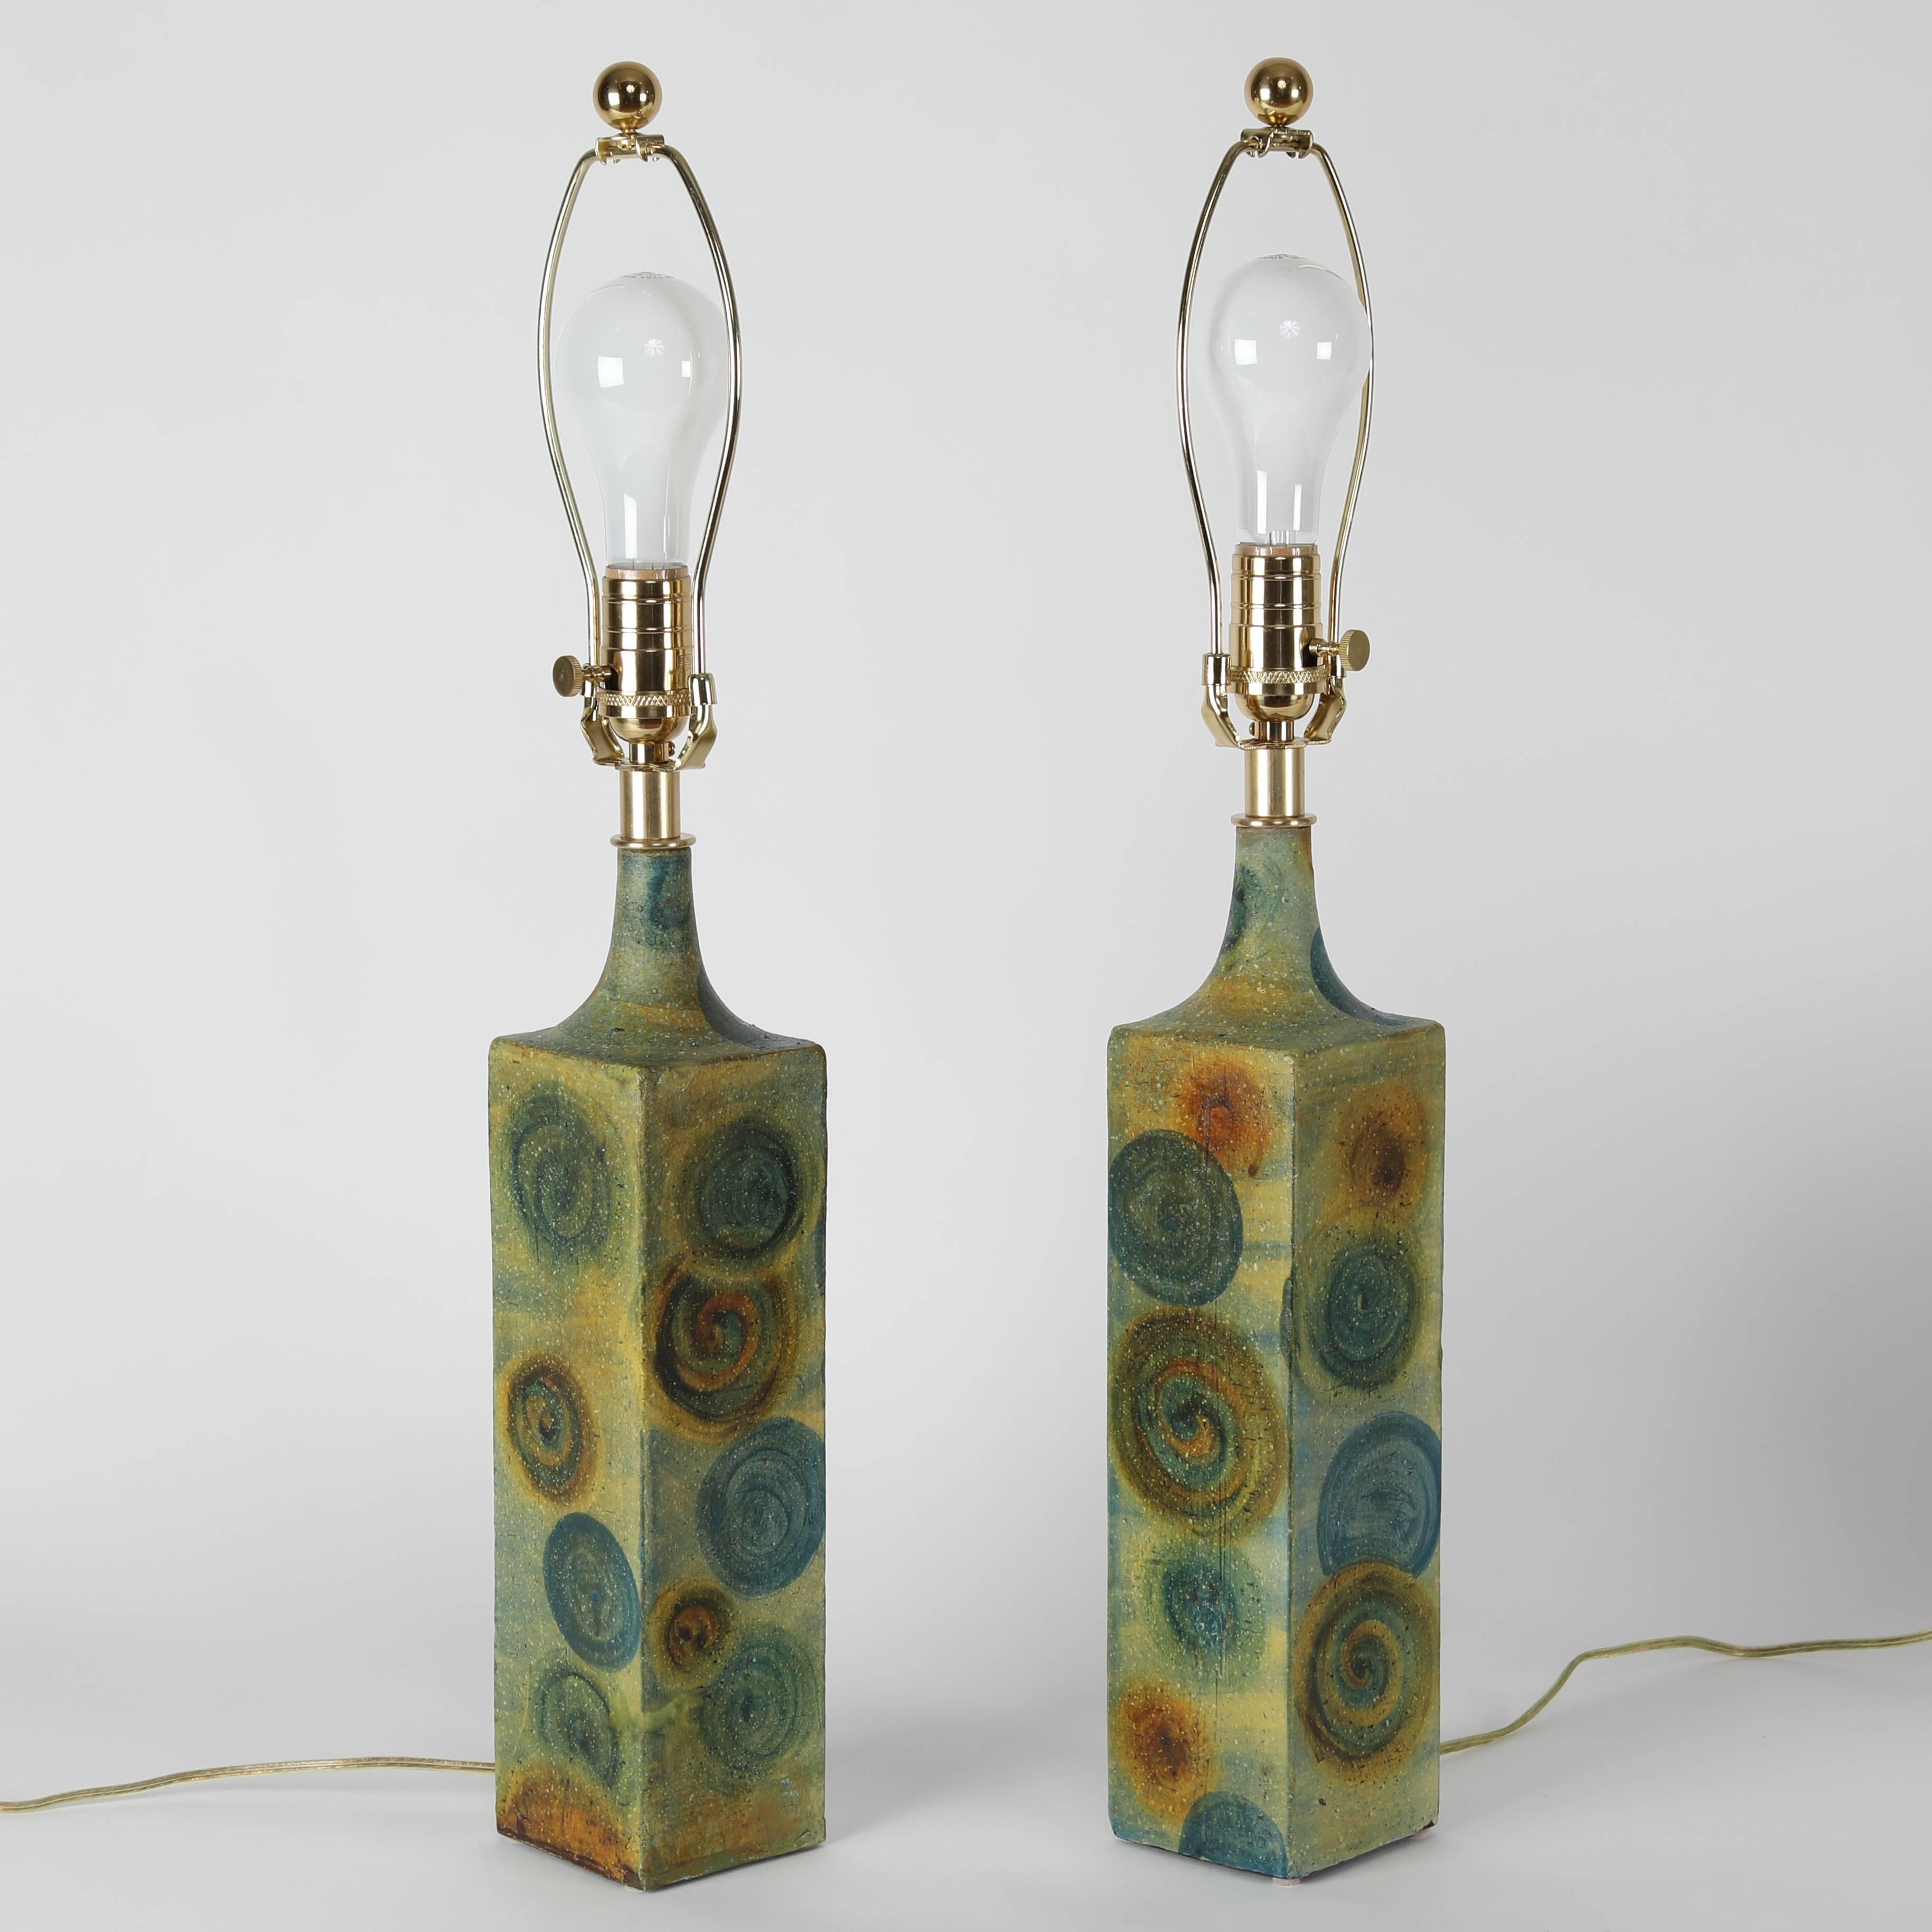 Fine pair of 1960s ceramic table lamps by noted Italian designer Marcello Fantoni. The square bases are hand-painted in blue-green and embellished with circles in blue and rust. Three-way switch on neck; standard-base socket. New polished-brass